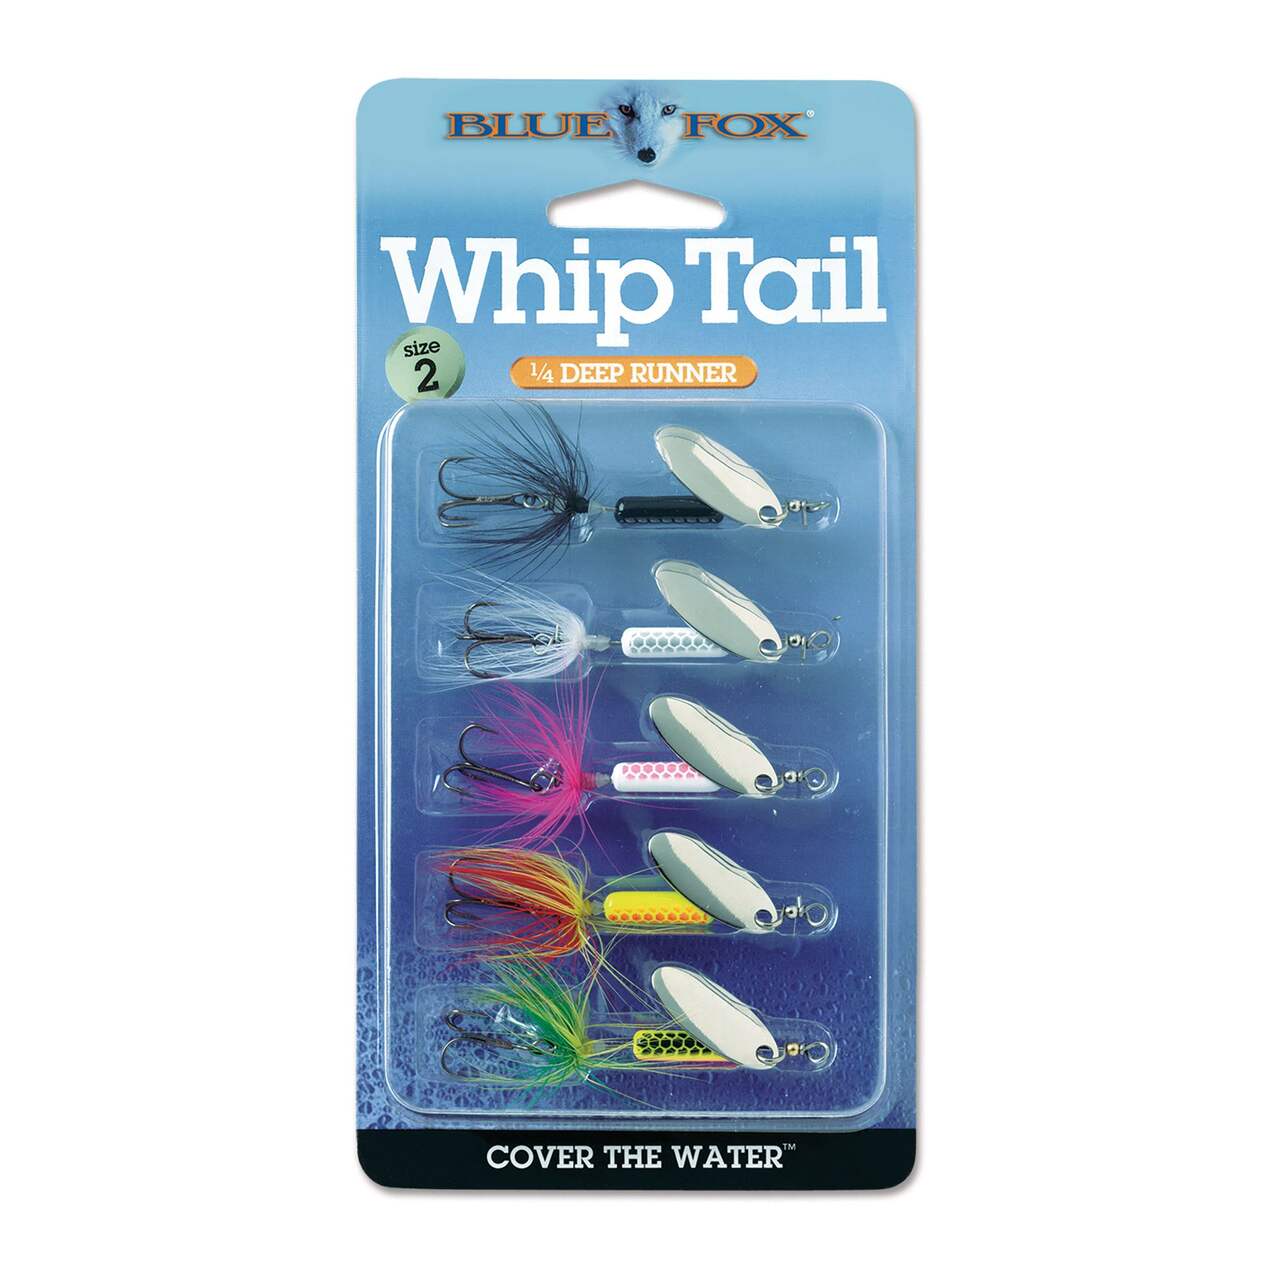 https://media-www.canadiantire.ca/product/playing/fishing/fishing-lures/0772903/blue-fox-whiptail-kit-5-pc-1-4-oz-4a2a963f-ed9f-4b03-863e-310e3bebe2ff-jpgrendition.jpg?imdensity=1&imwidth=1244&impolicy=mZoom